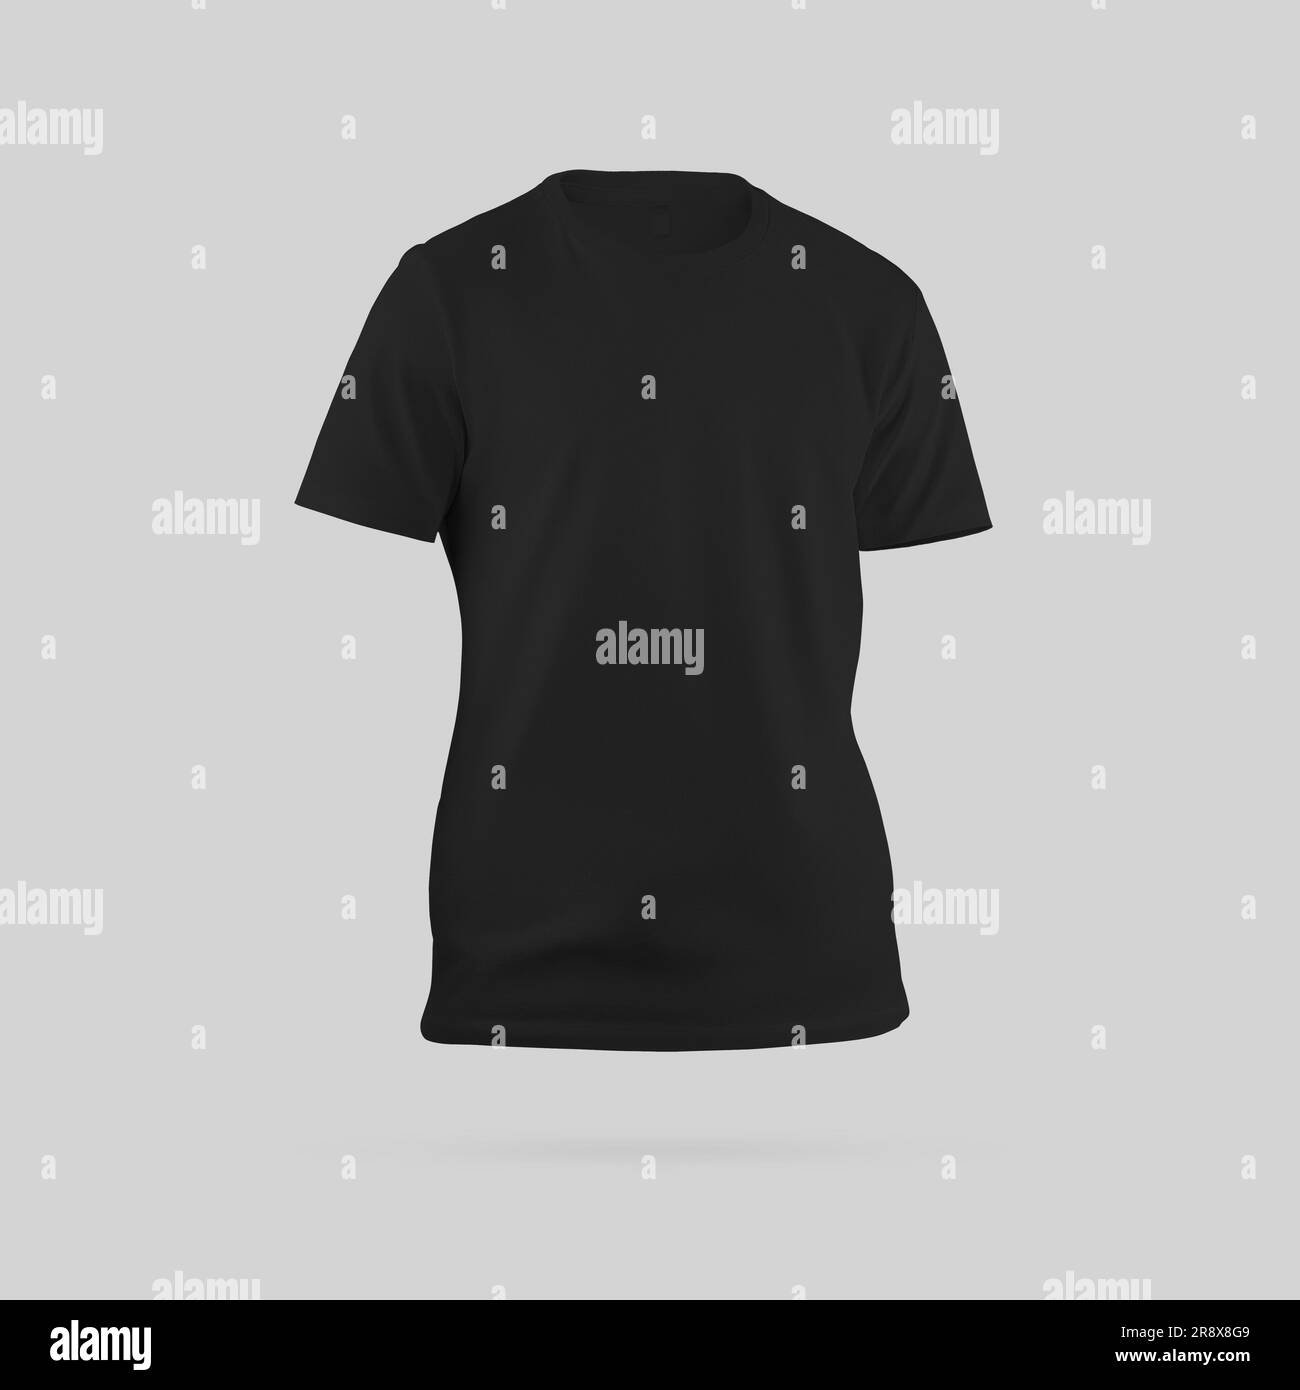 Men's black t-shirt template with label, round neckline, texture shirt 3D rendering, front view, isolated on background. Mockup of clothes for design. Stock Photo